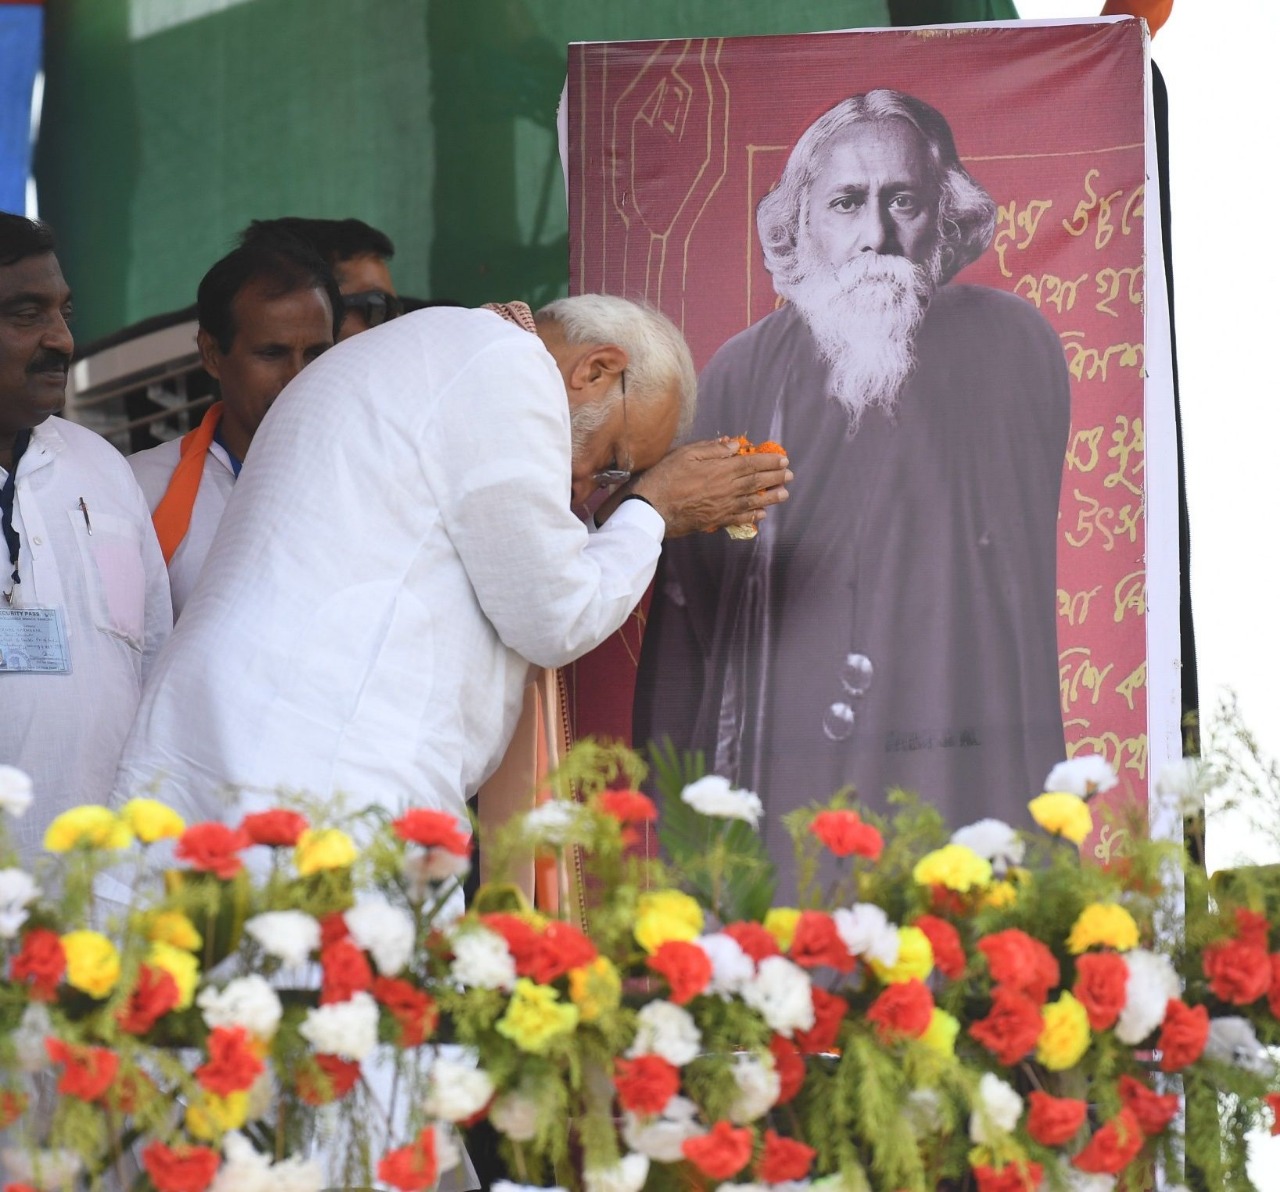 PM Modi tweets: Tributes to Gurudev Tagore on his Jayanti. Gifted in several fields, he made a strong contribution towards India’s freedom movement. His clarity of thought and expression were always outstanding.